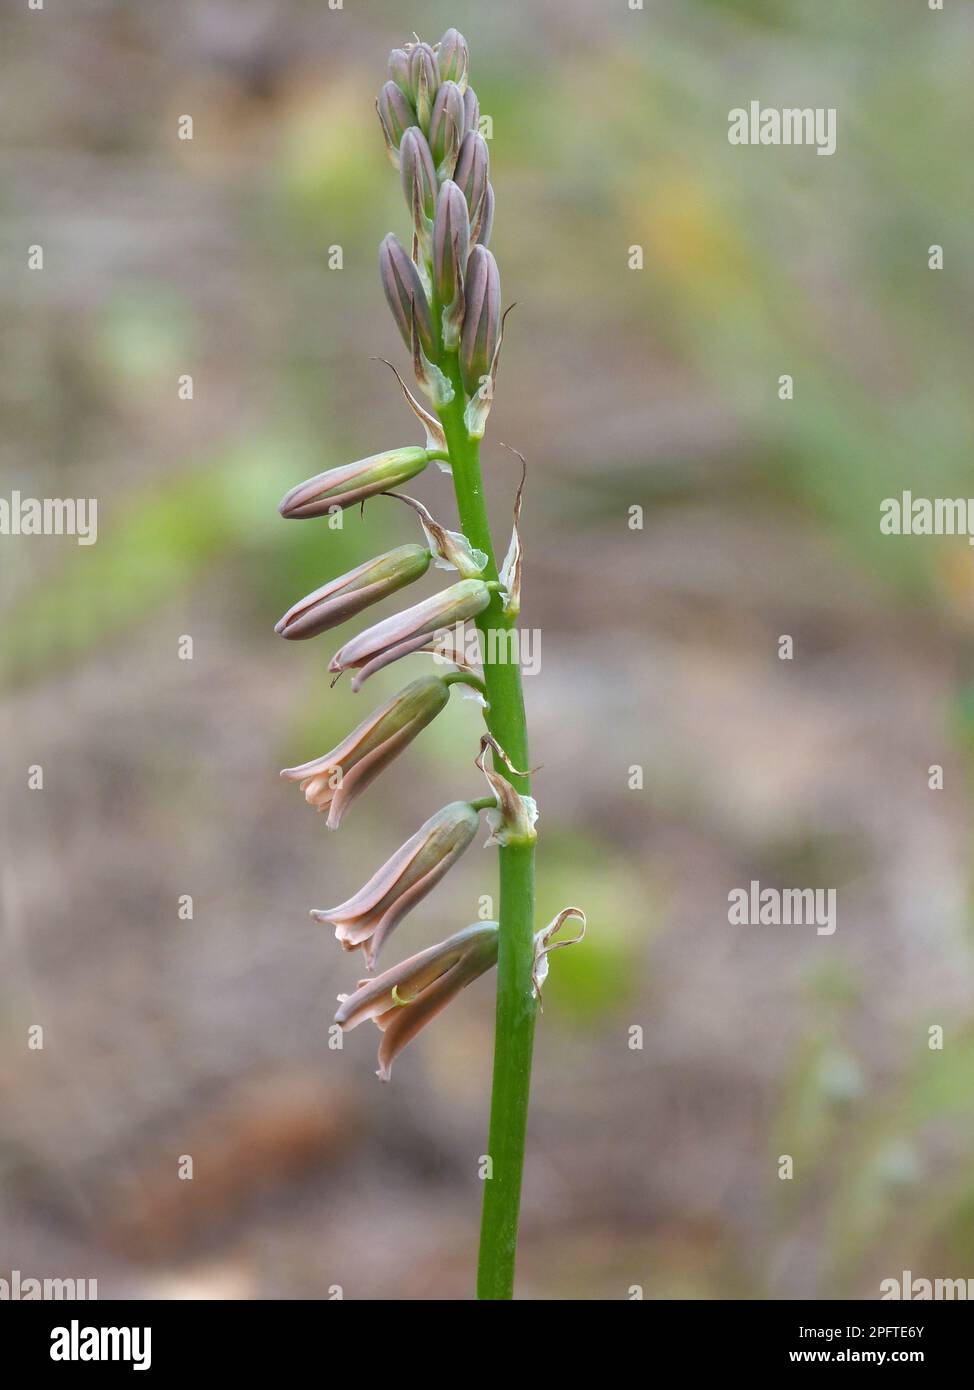 Flowering stem of brown bluebell (Dipcadi serotina), growing in pine forests, Andalusia, Spain Stock Photo